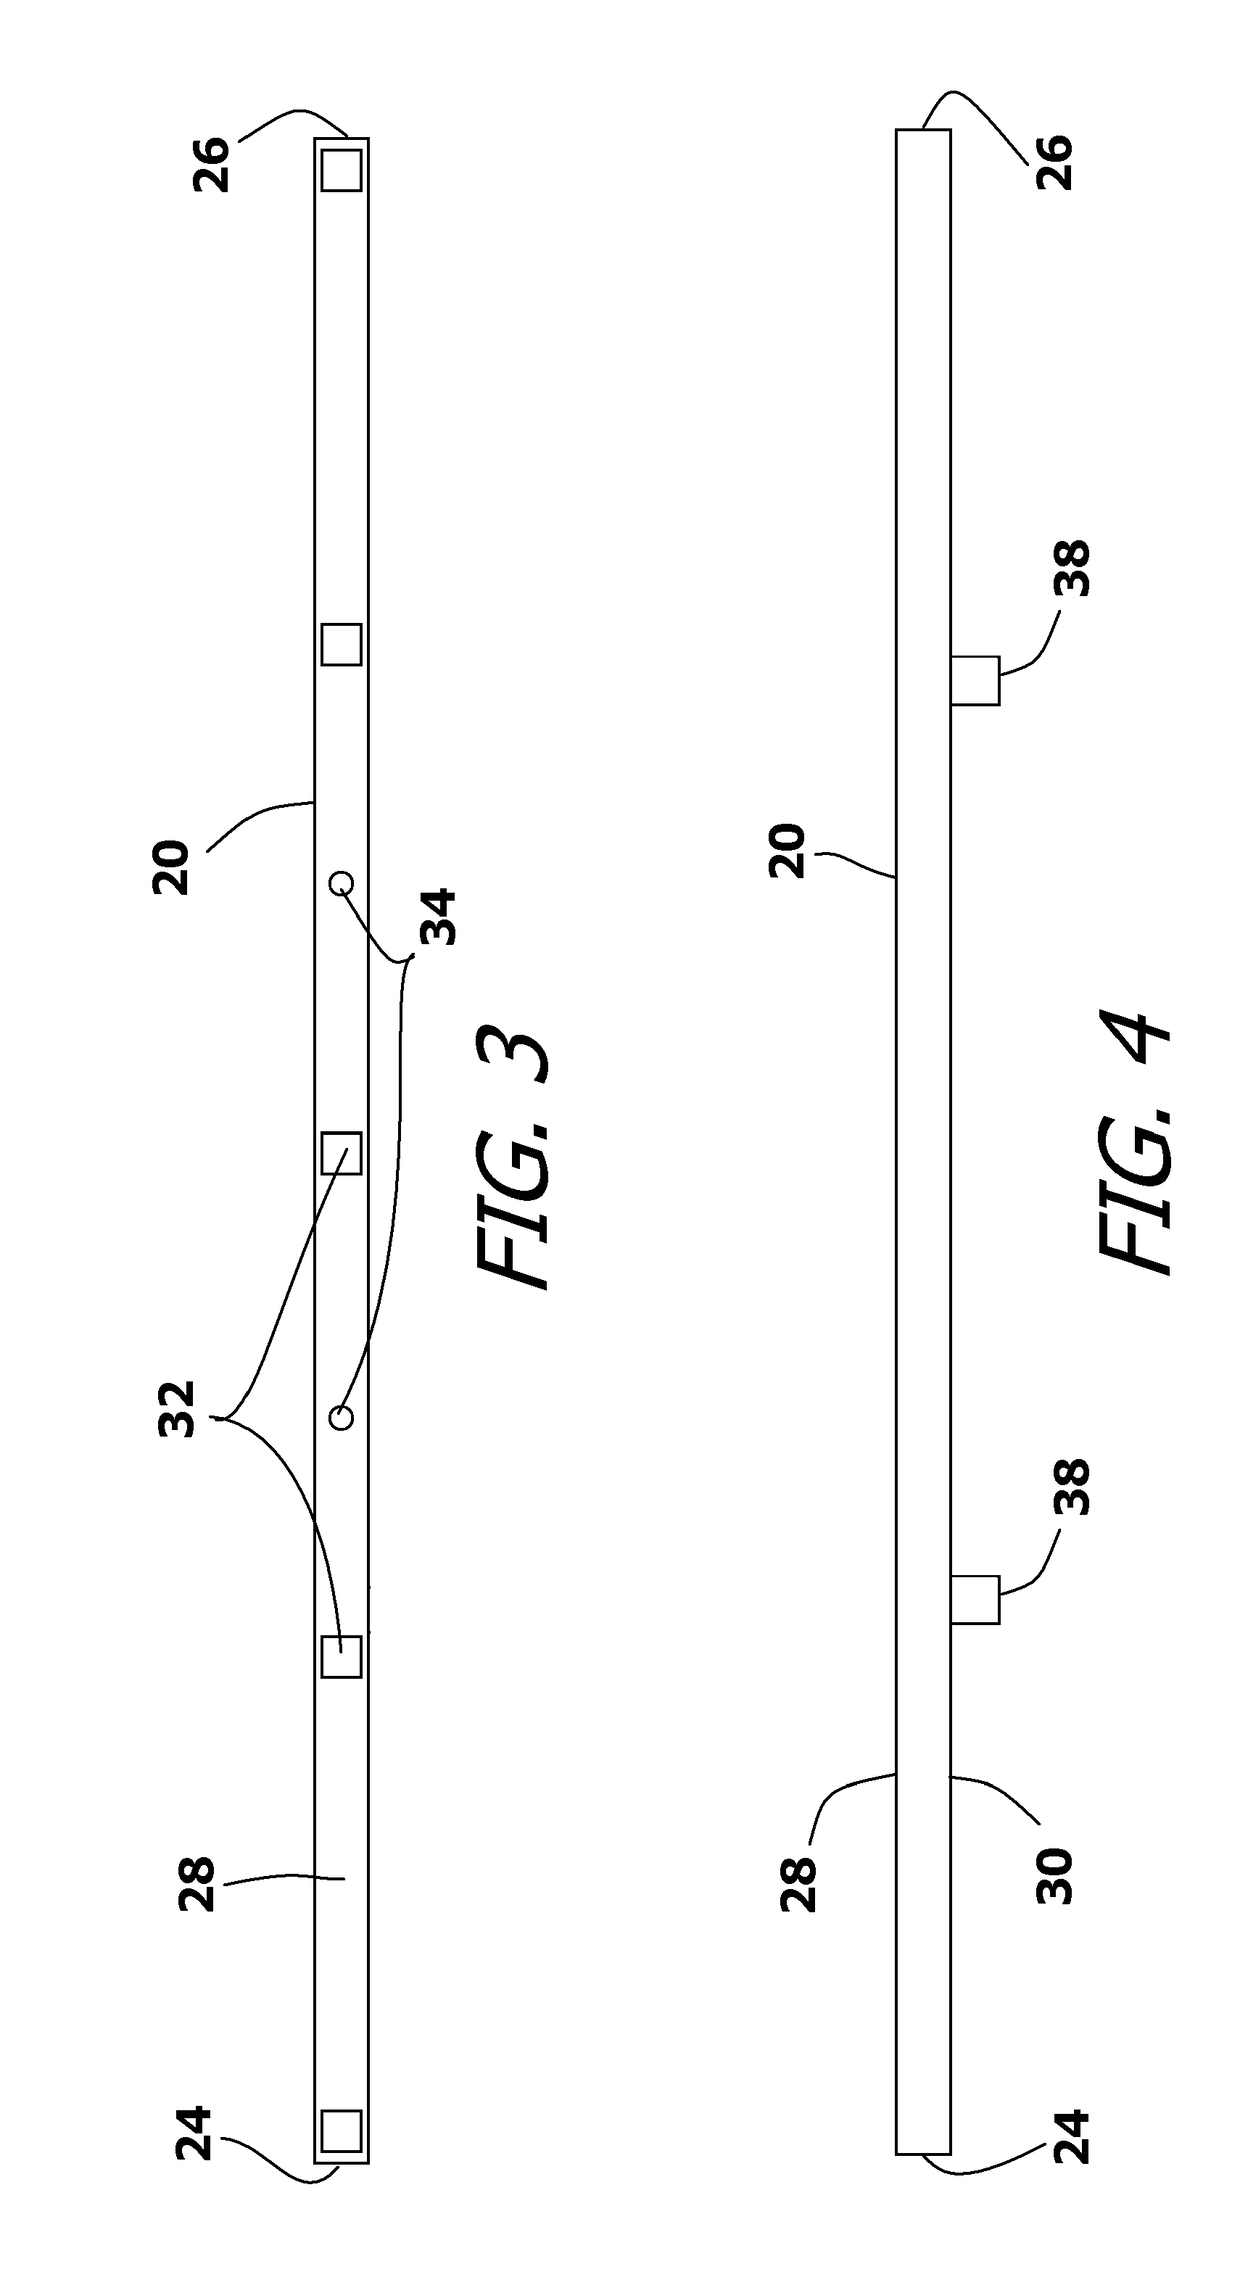 Roof Rack System for a Vehicle and Its Associated Method of Installation